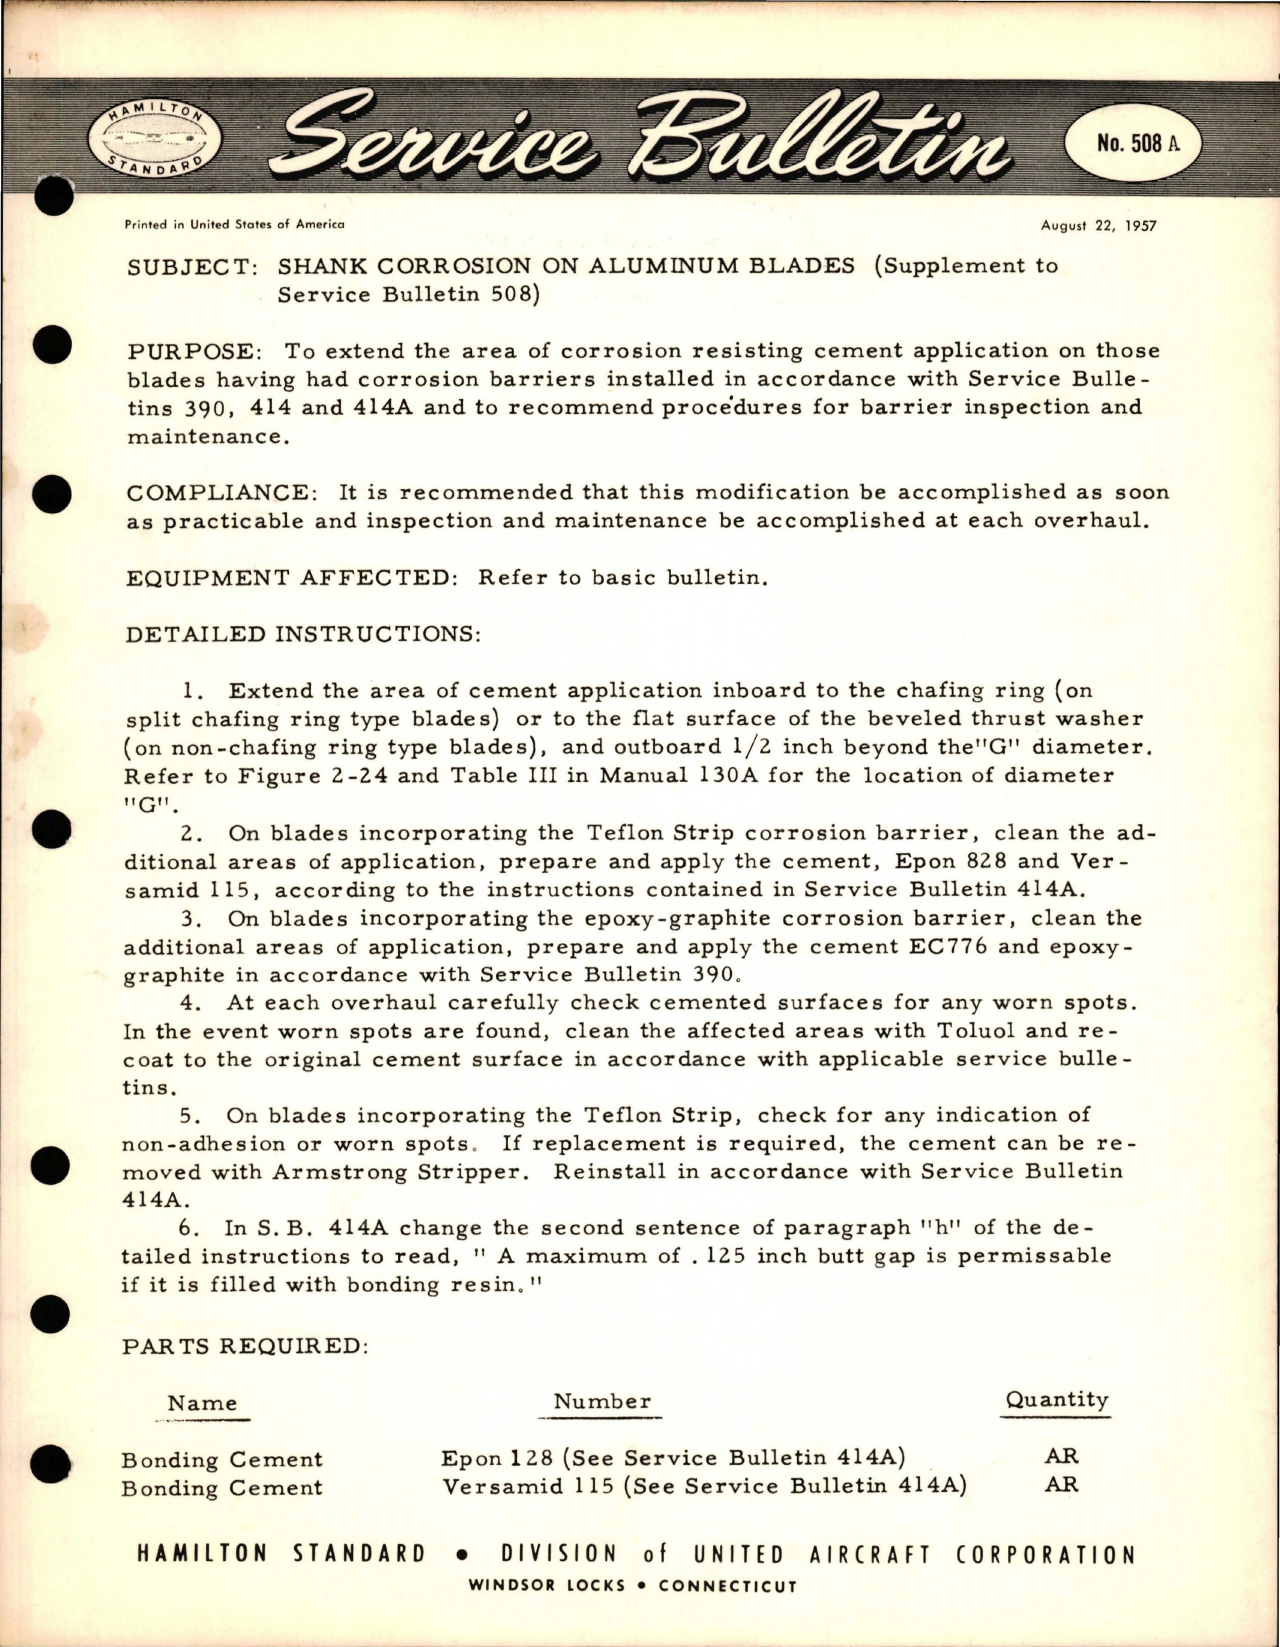 Sample page 1 from AirCorps Library document: Shank Corrosion on Aluminum Blades (Supplement to 508)